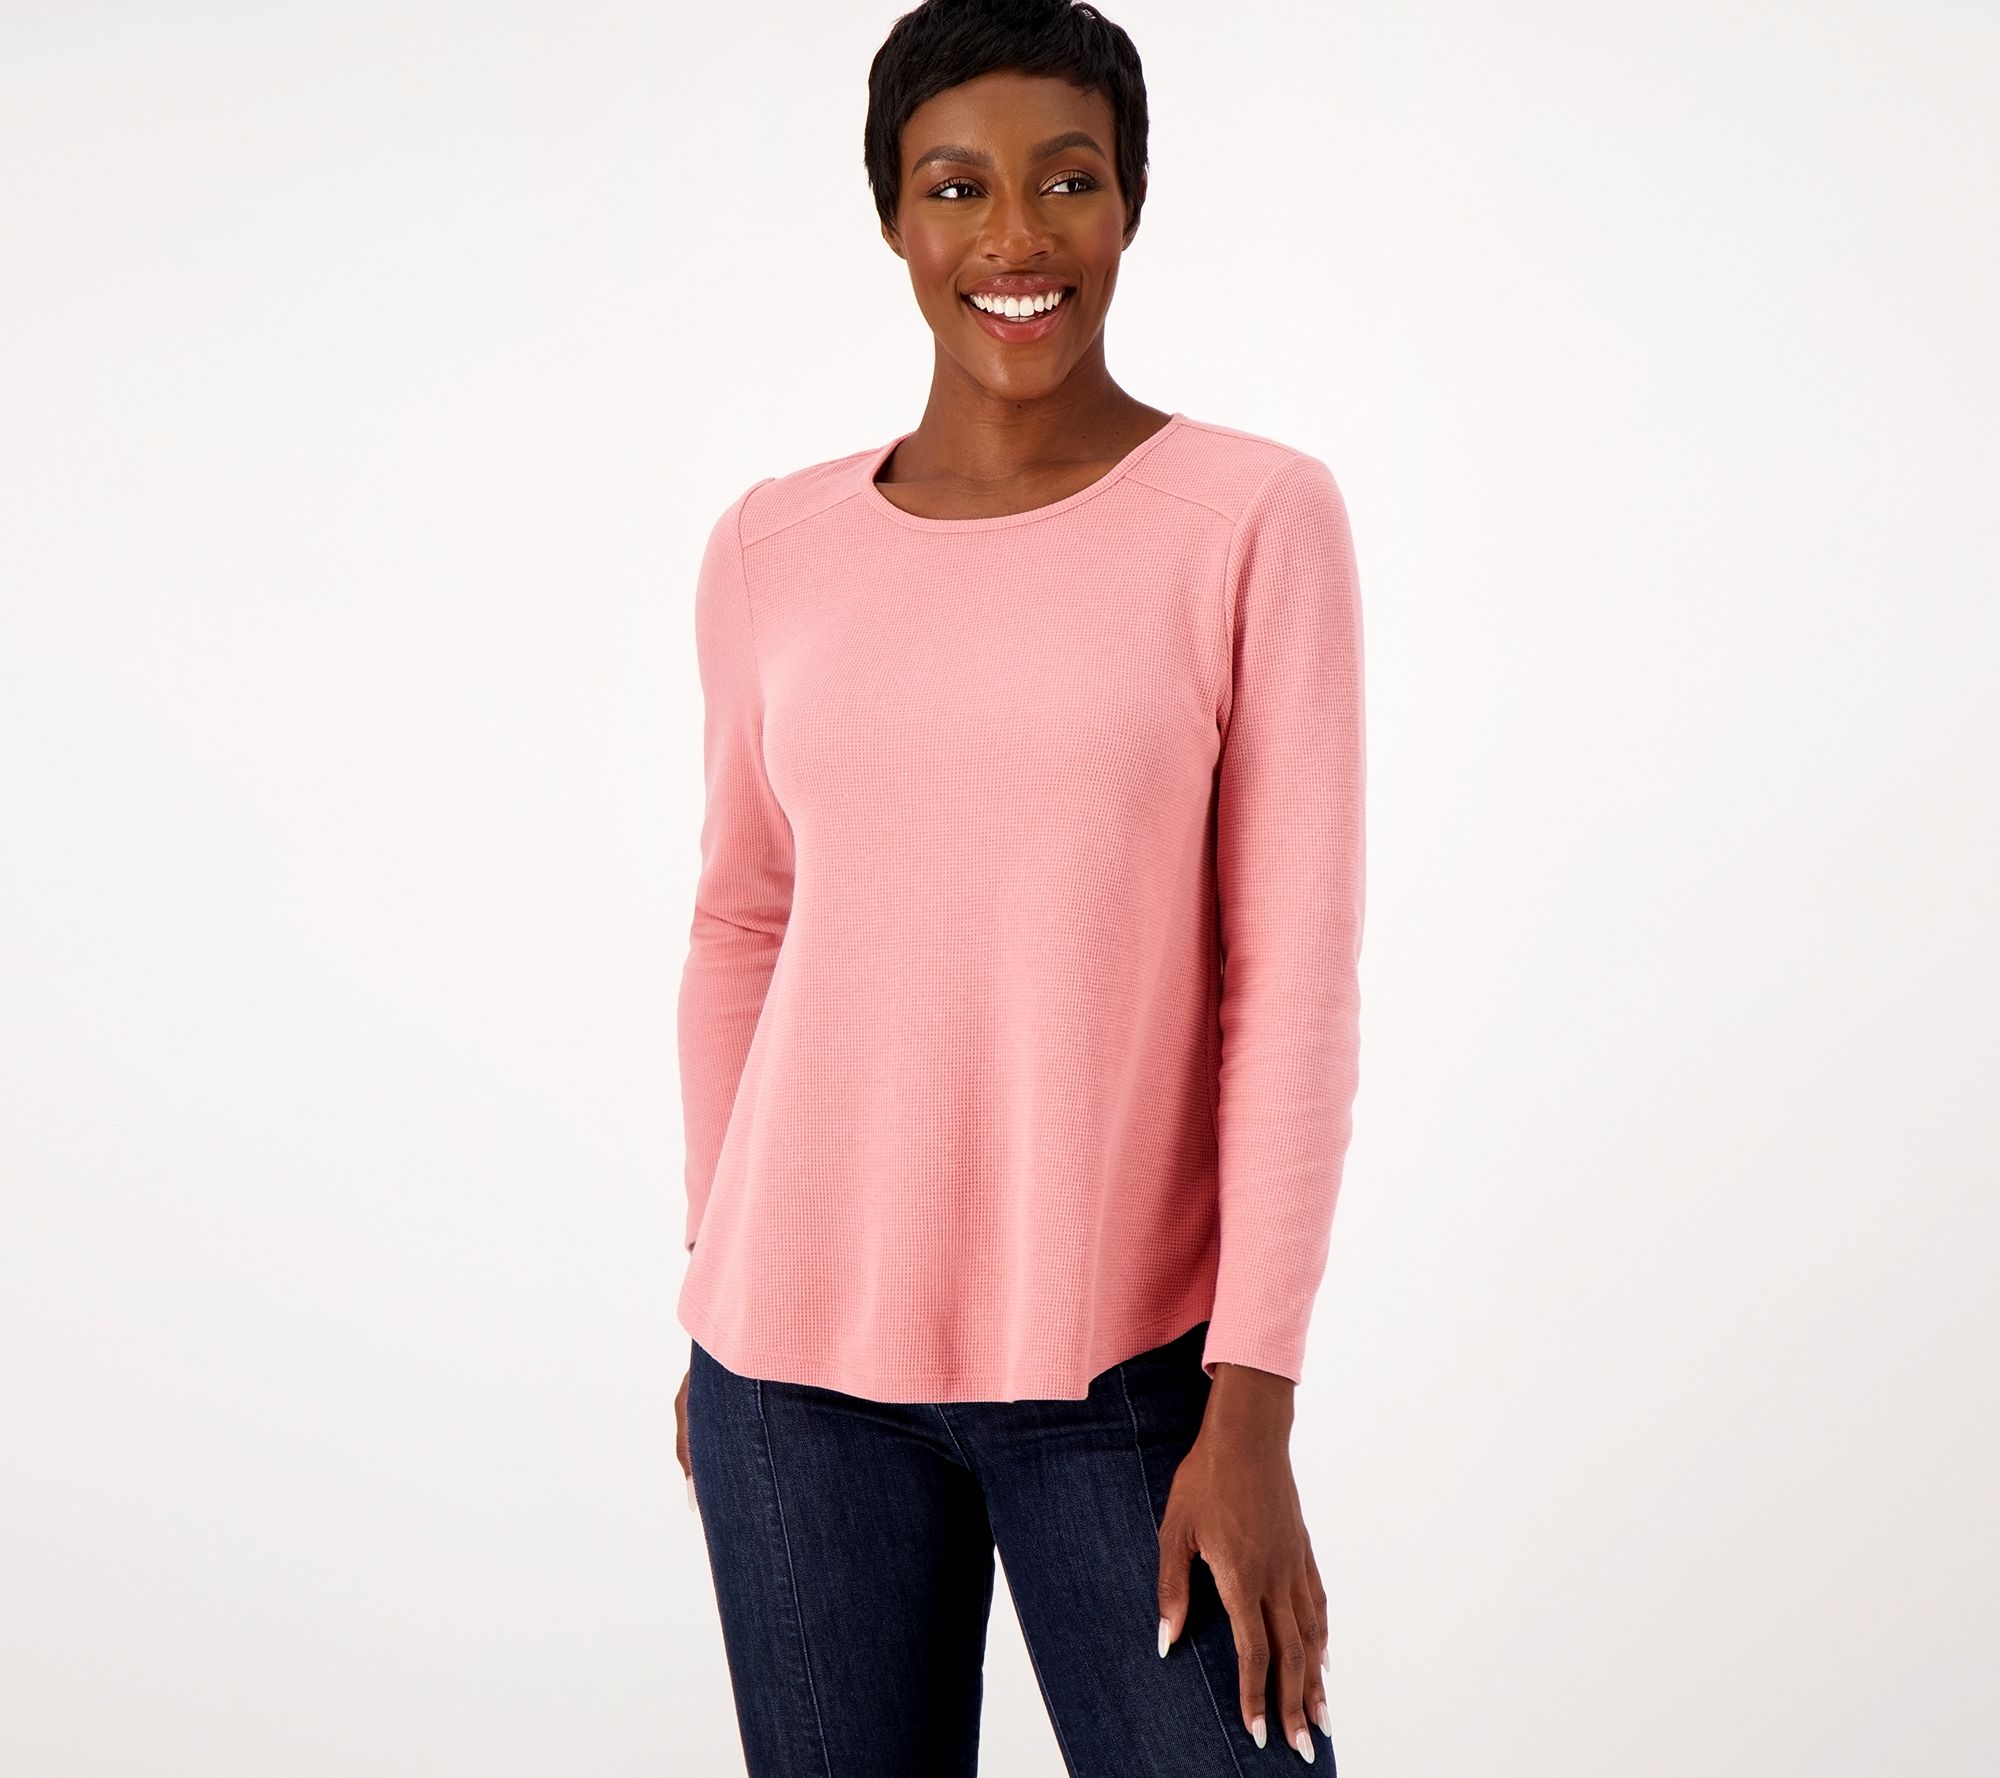 Tops & Knit Tees For Women